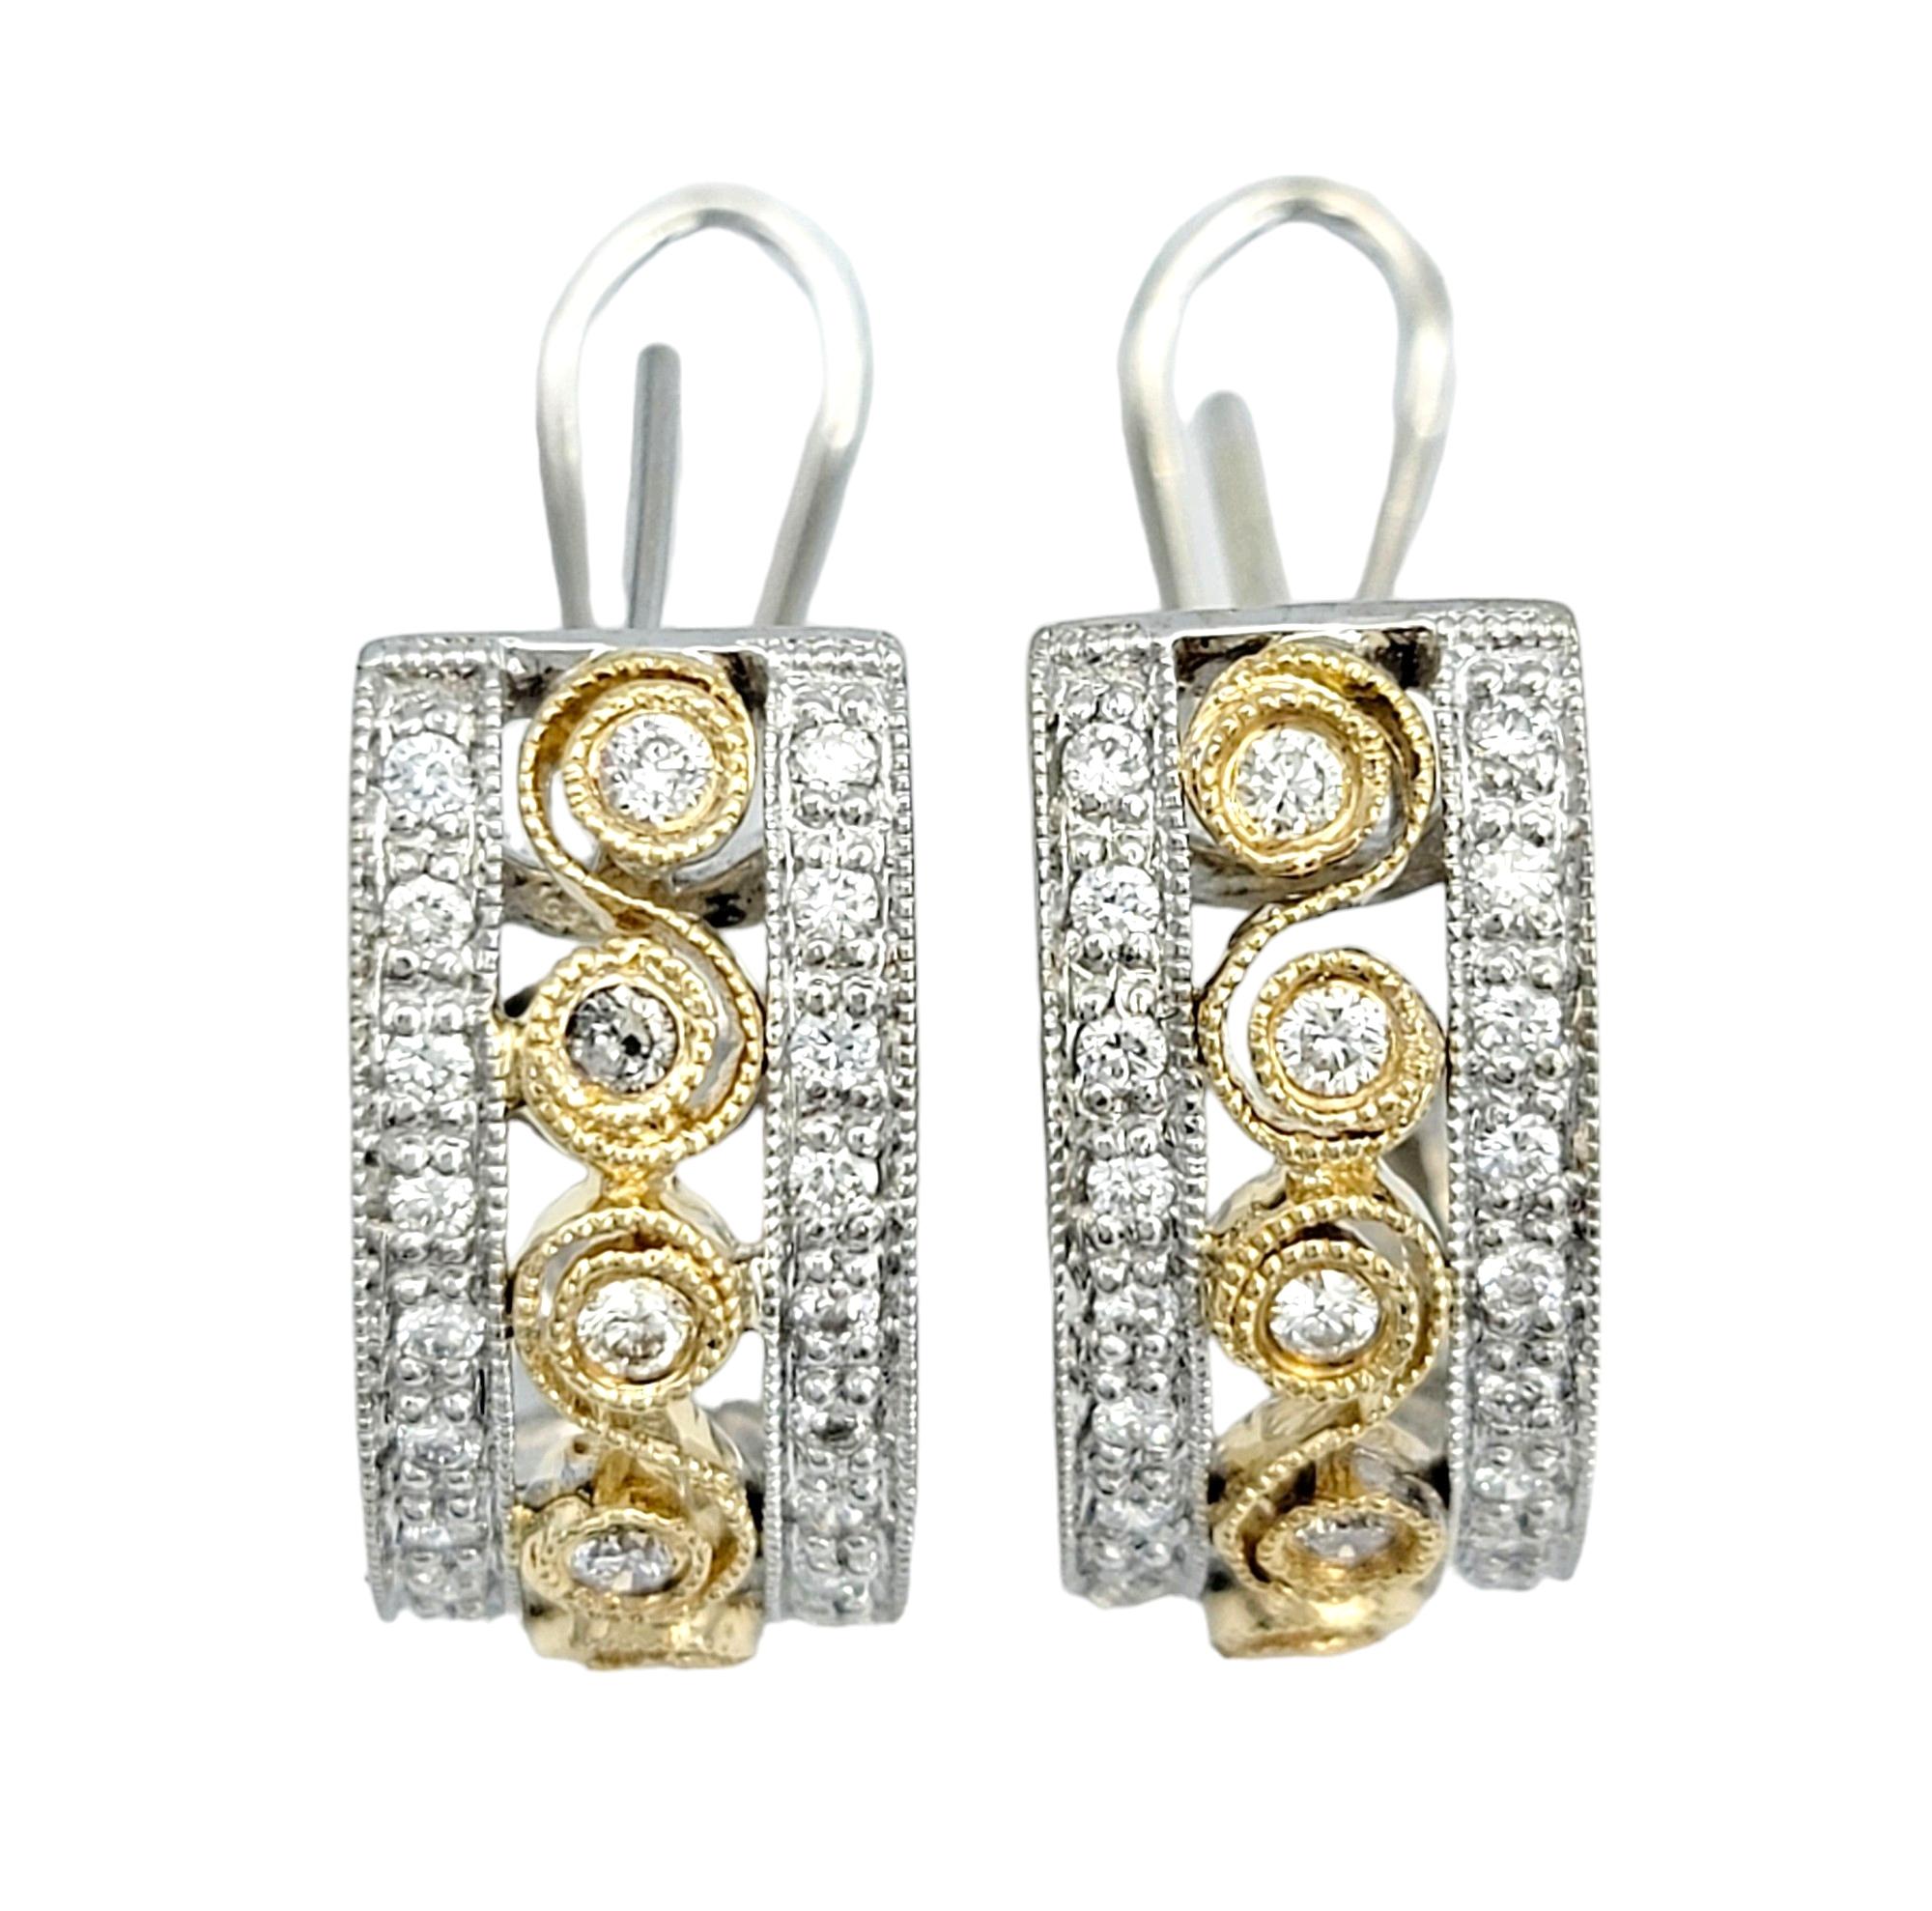 Contemporary Round Diamond Scroll Design J-Hoop Earrings in 14 Karat White and Yellow Gold For Sale